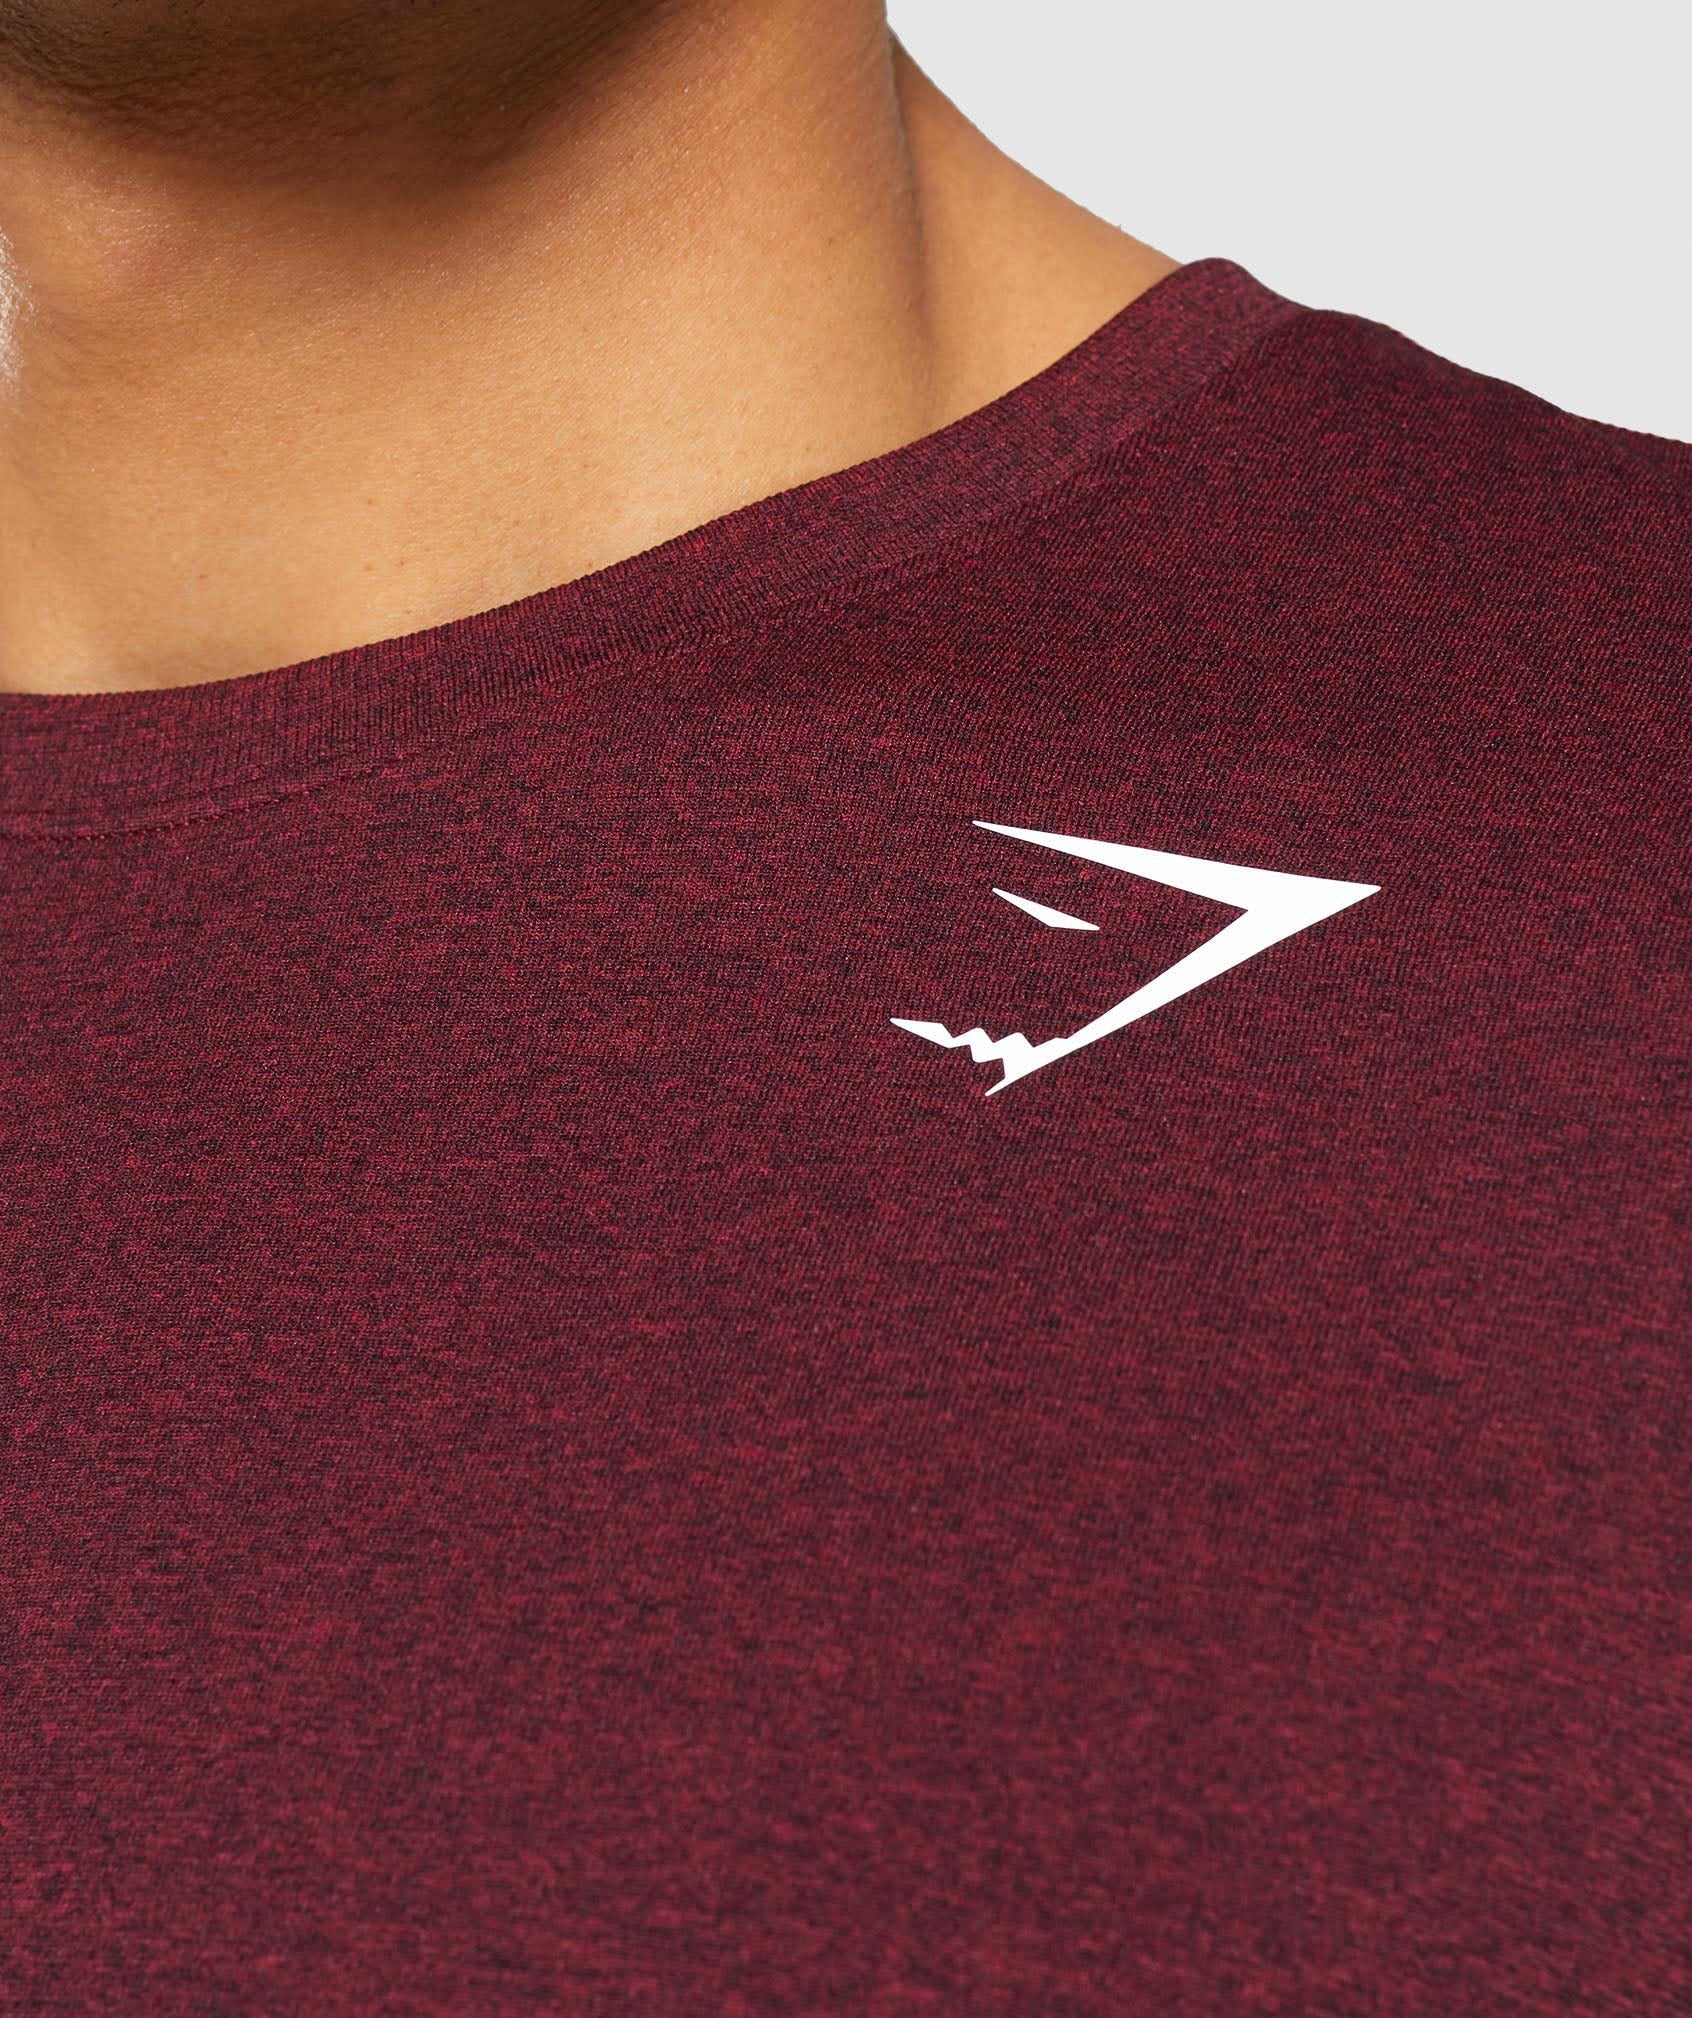 Arrival Seamless Long Sleeve T-Shirt in Burgundy Red Marl - view 6